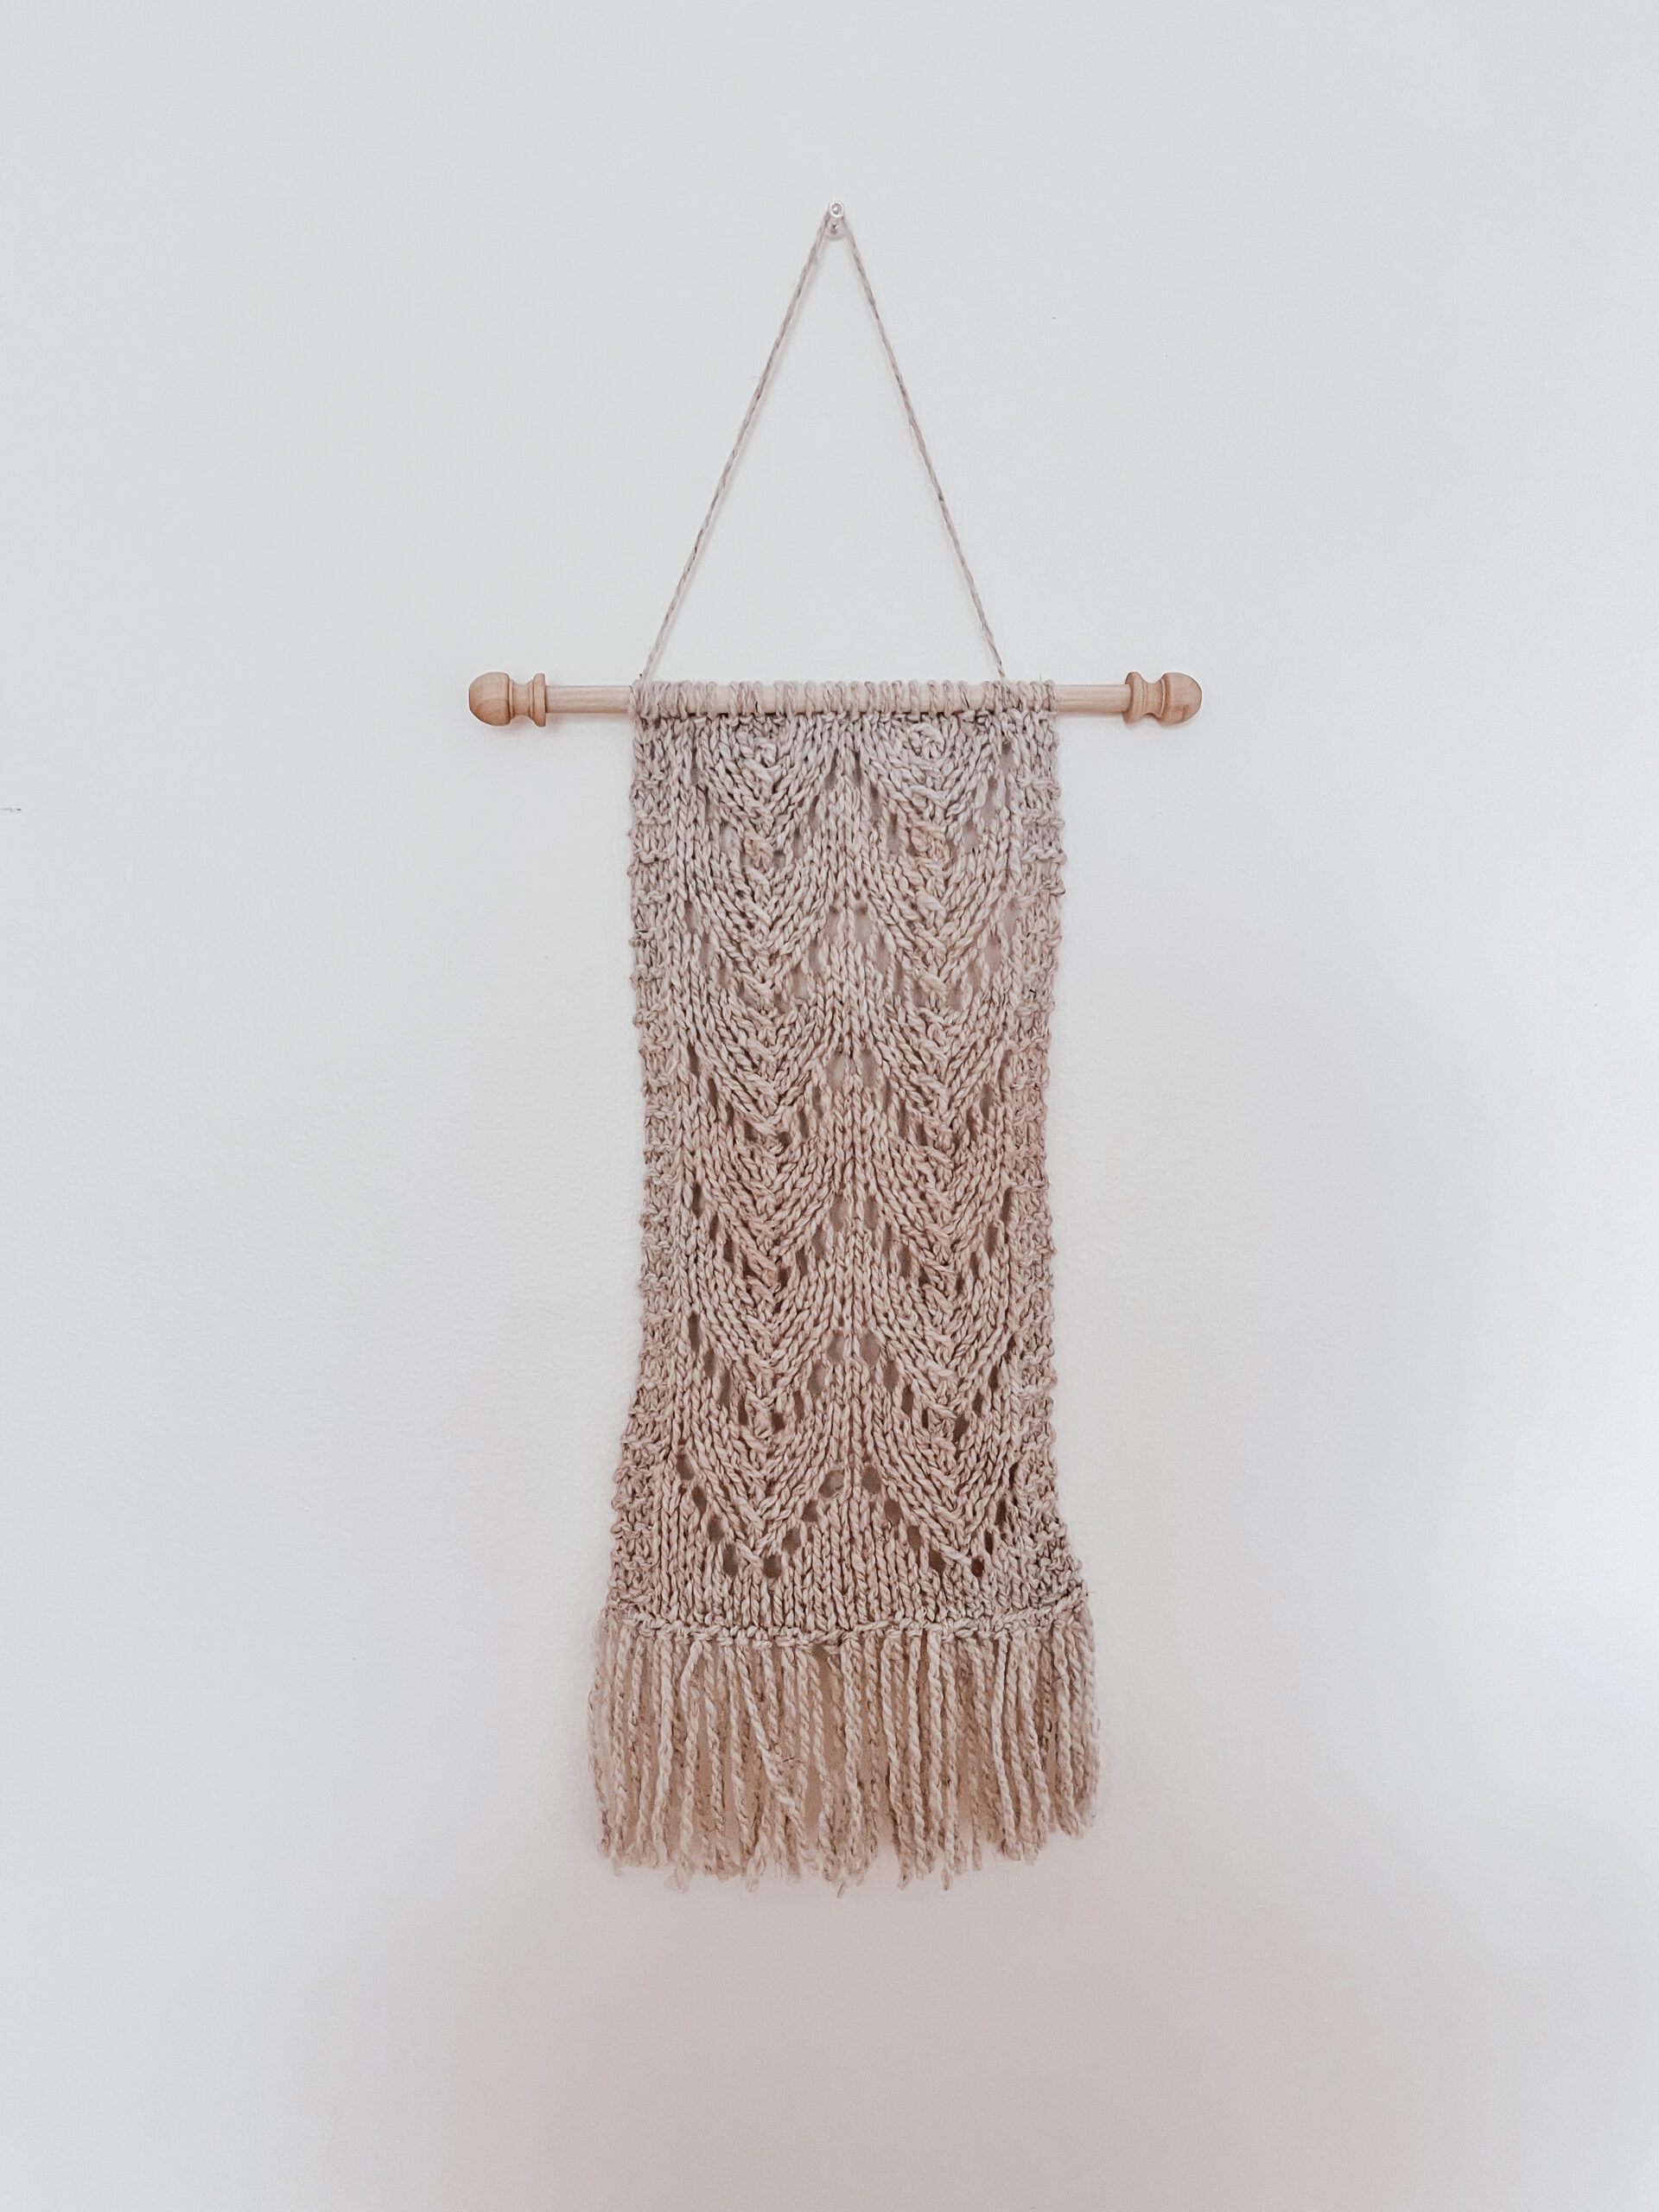 A natural tan wool wall hanging is attached to a wooden dowel, hung from a longer string of wool. The hanging shows knitted chevrons in 2 columns with fringe on the bottom of the wall hanging.